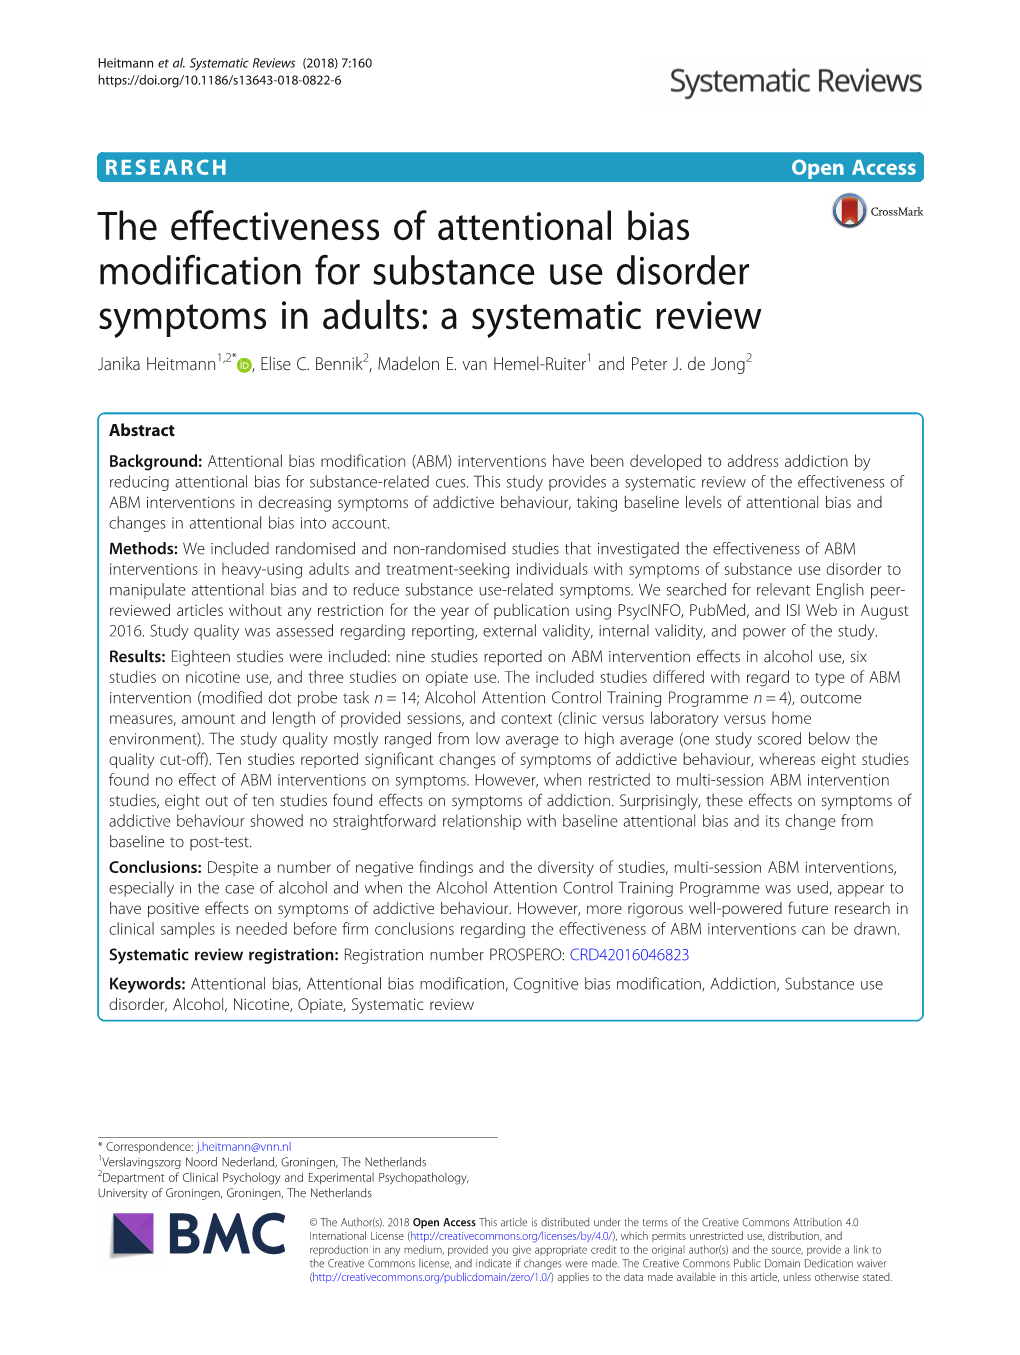 The Effectiveness of Attentional Bias Modification for Substance Use Disorder Symptoms in Adults: a Systematic Review Janika Heitmann1,2* , Elise C